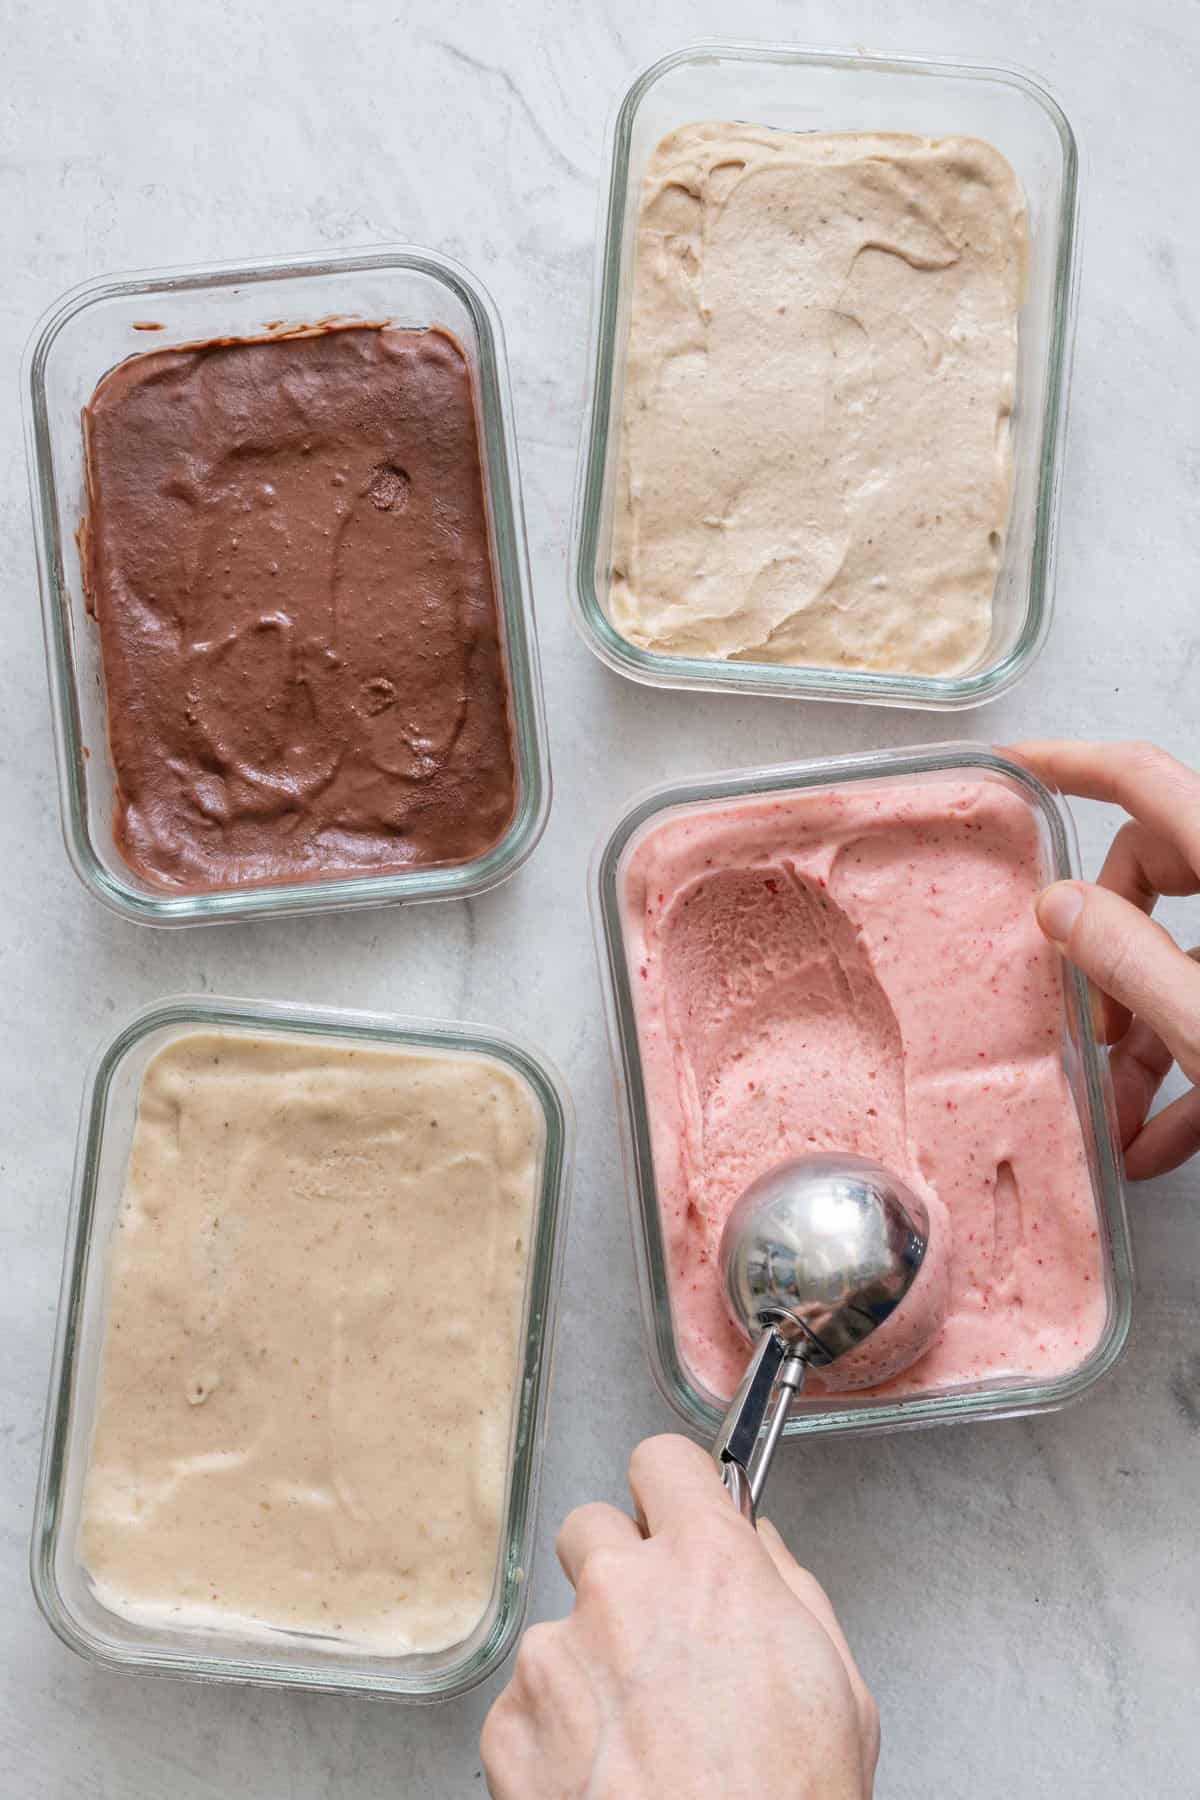 Nice cream four ways in freezer safe glass containers and a serving of strawberry nice cream being scooped out with an ice cream scooper.